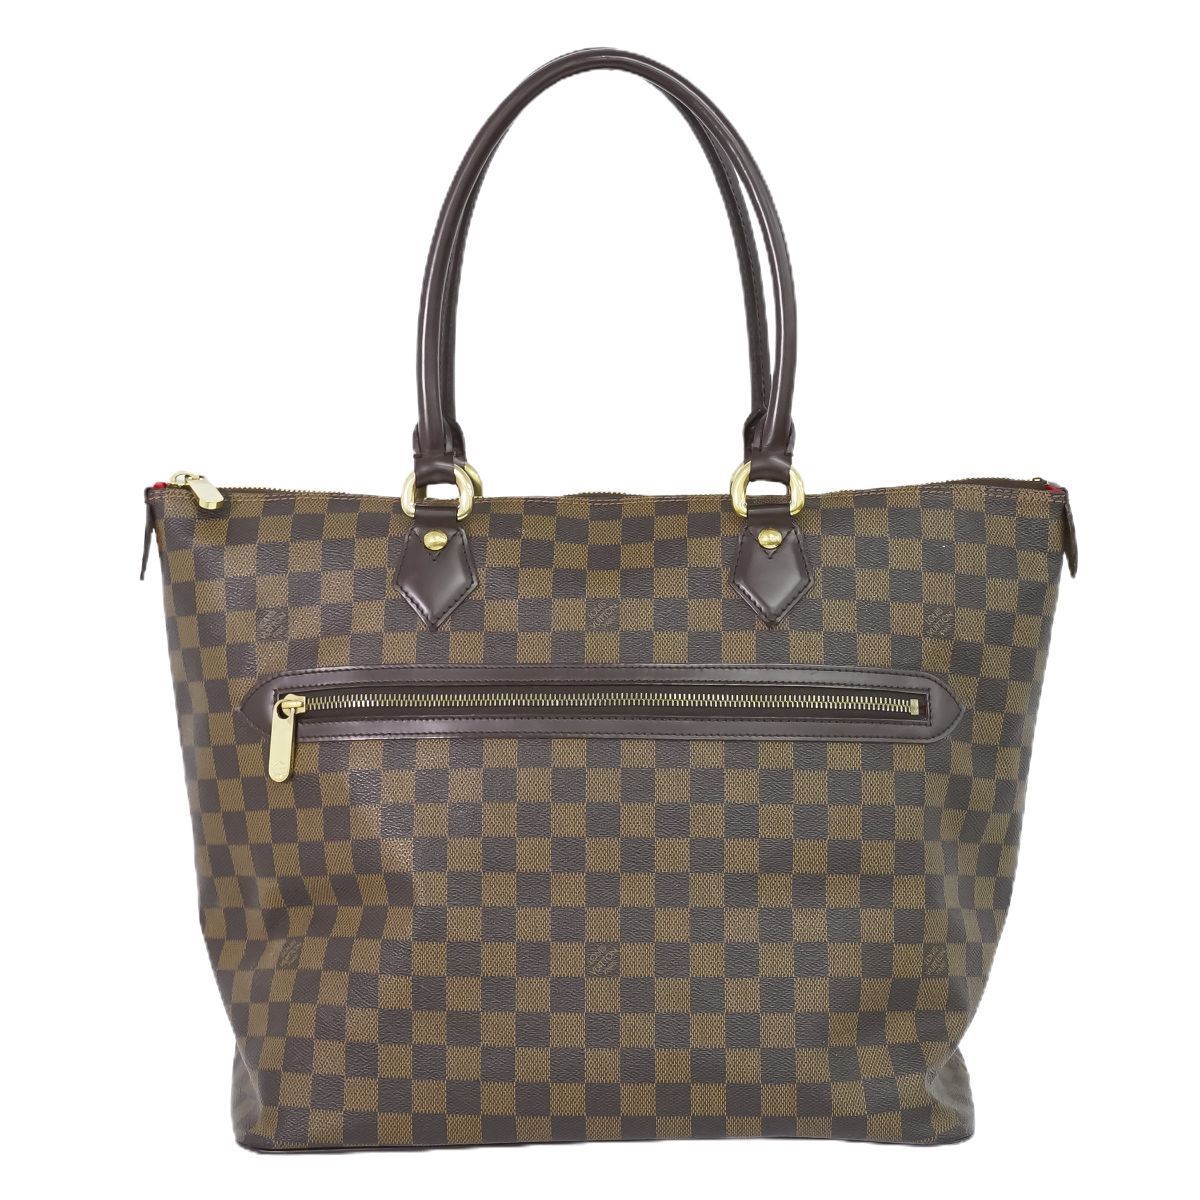 LOUIS VUITTON ルイヴィトン ダミエ サレヤGM トートバッグ N51181 ブラウン by